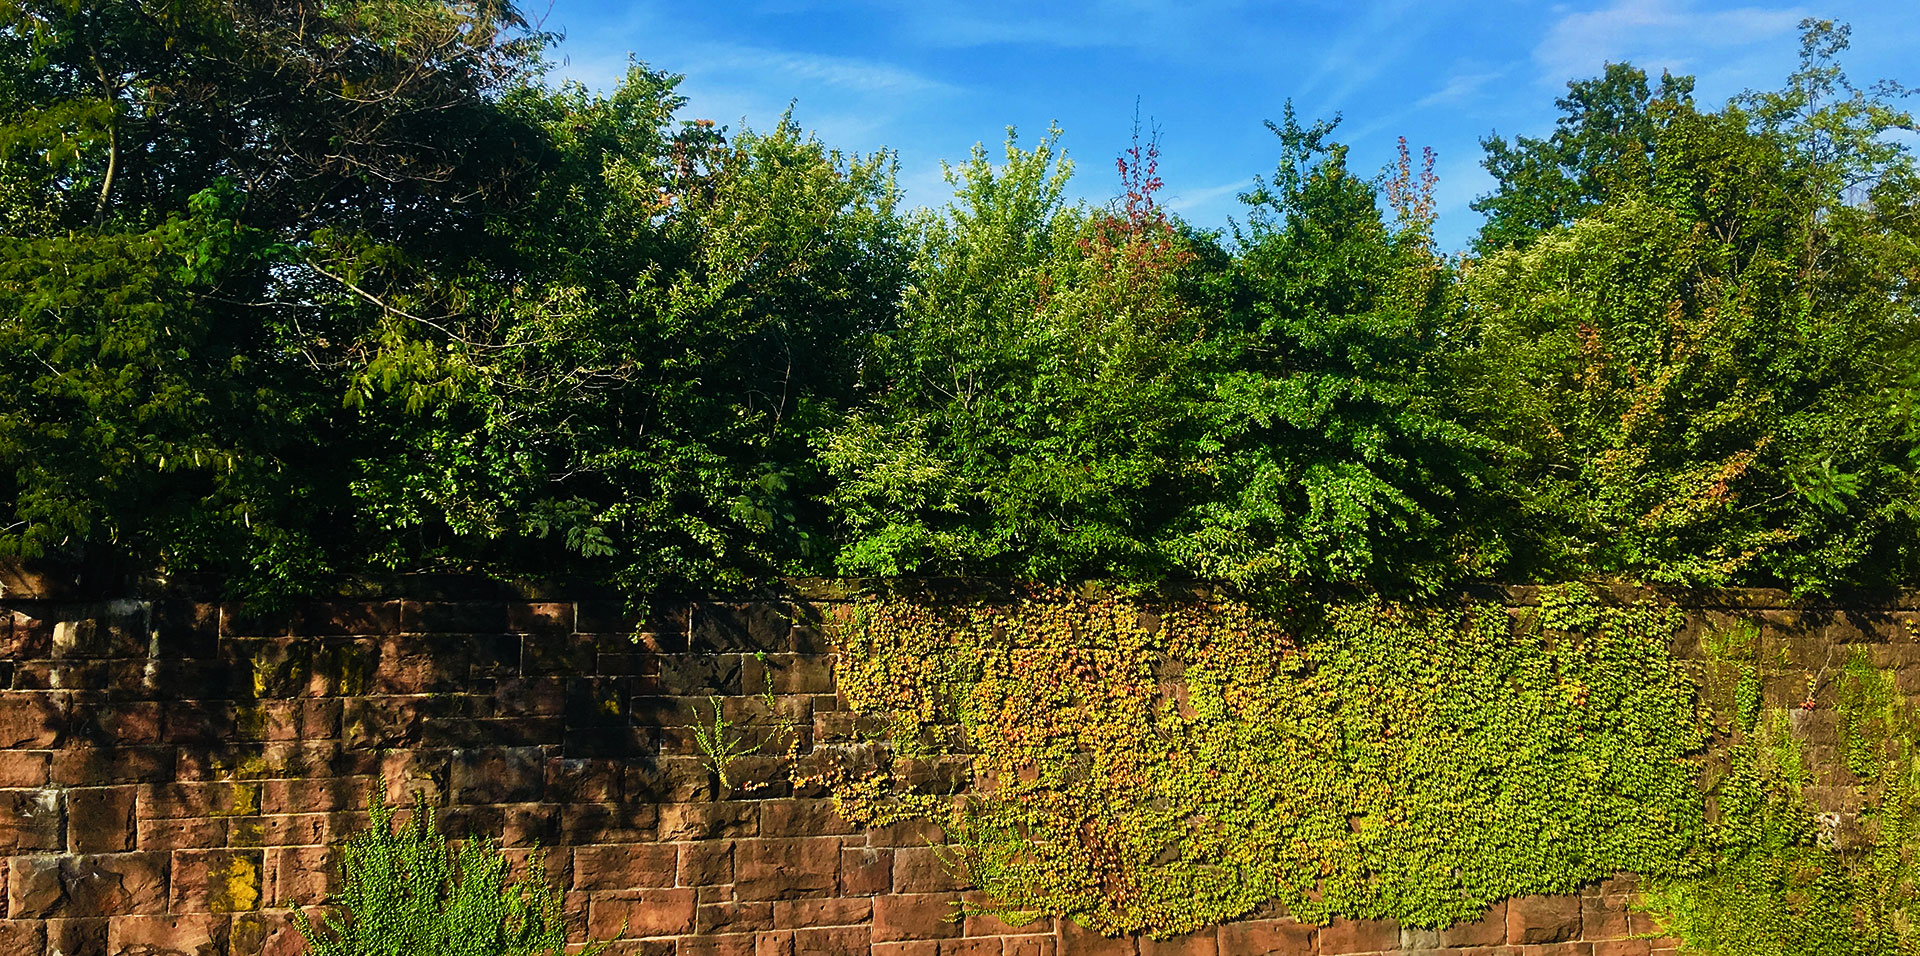 View of Embankment walls and greenery